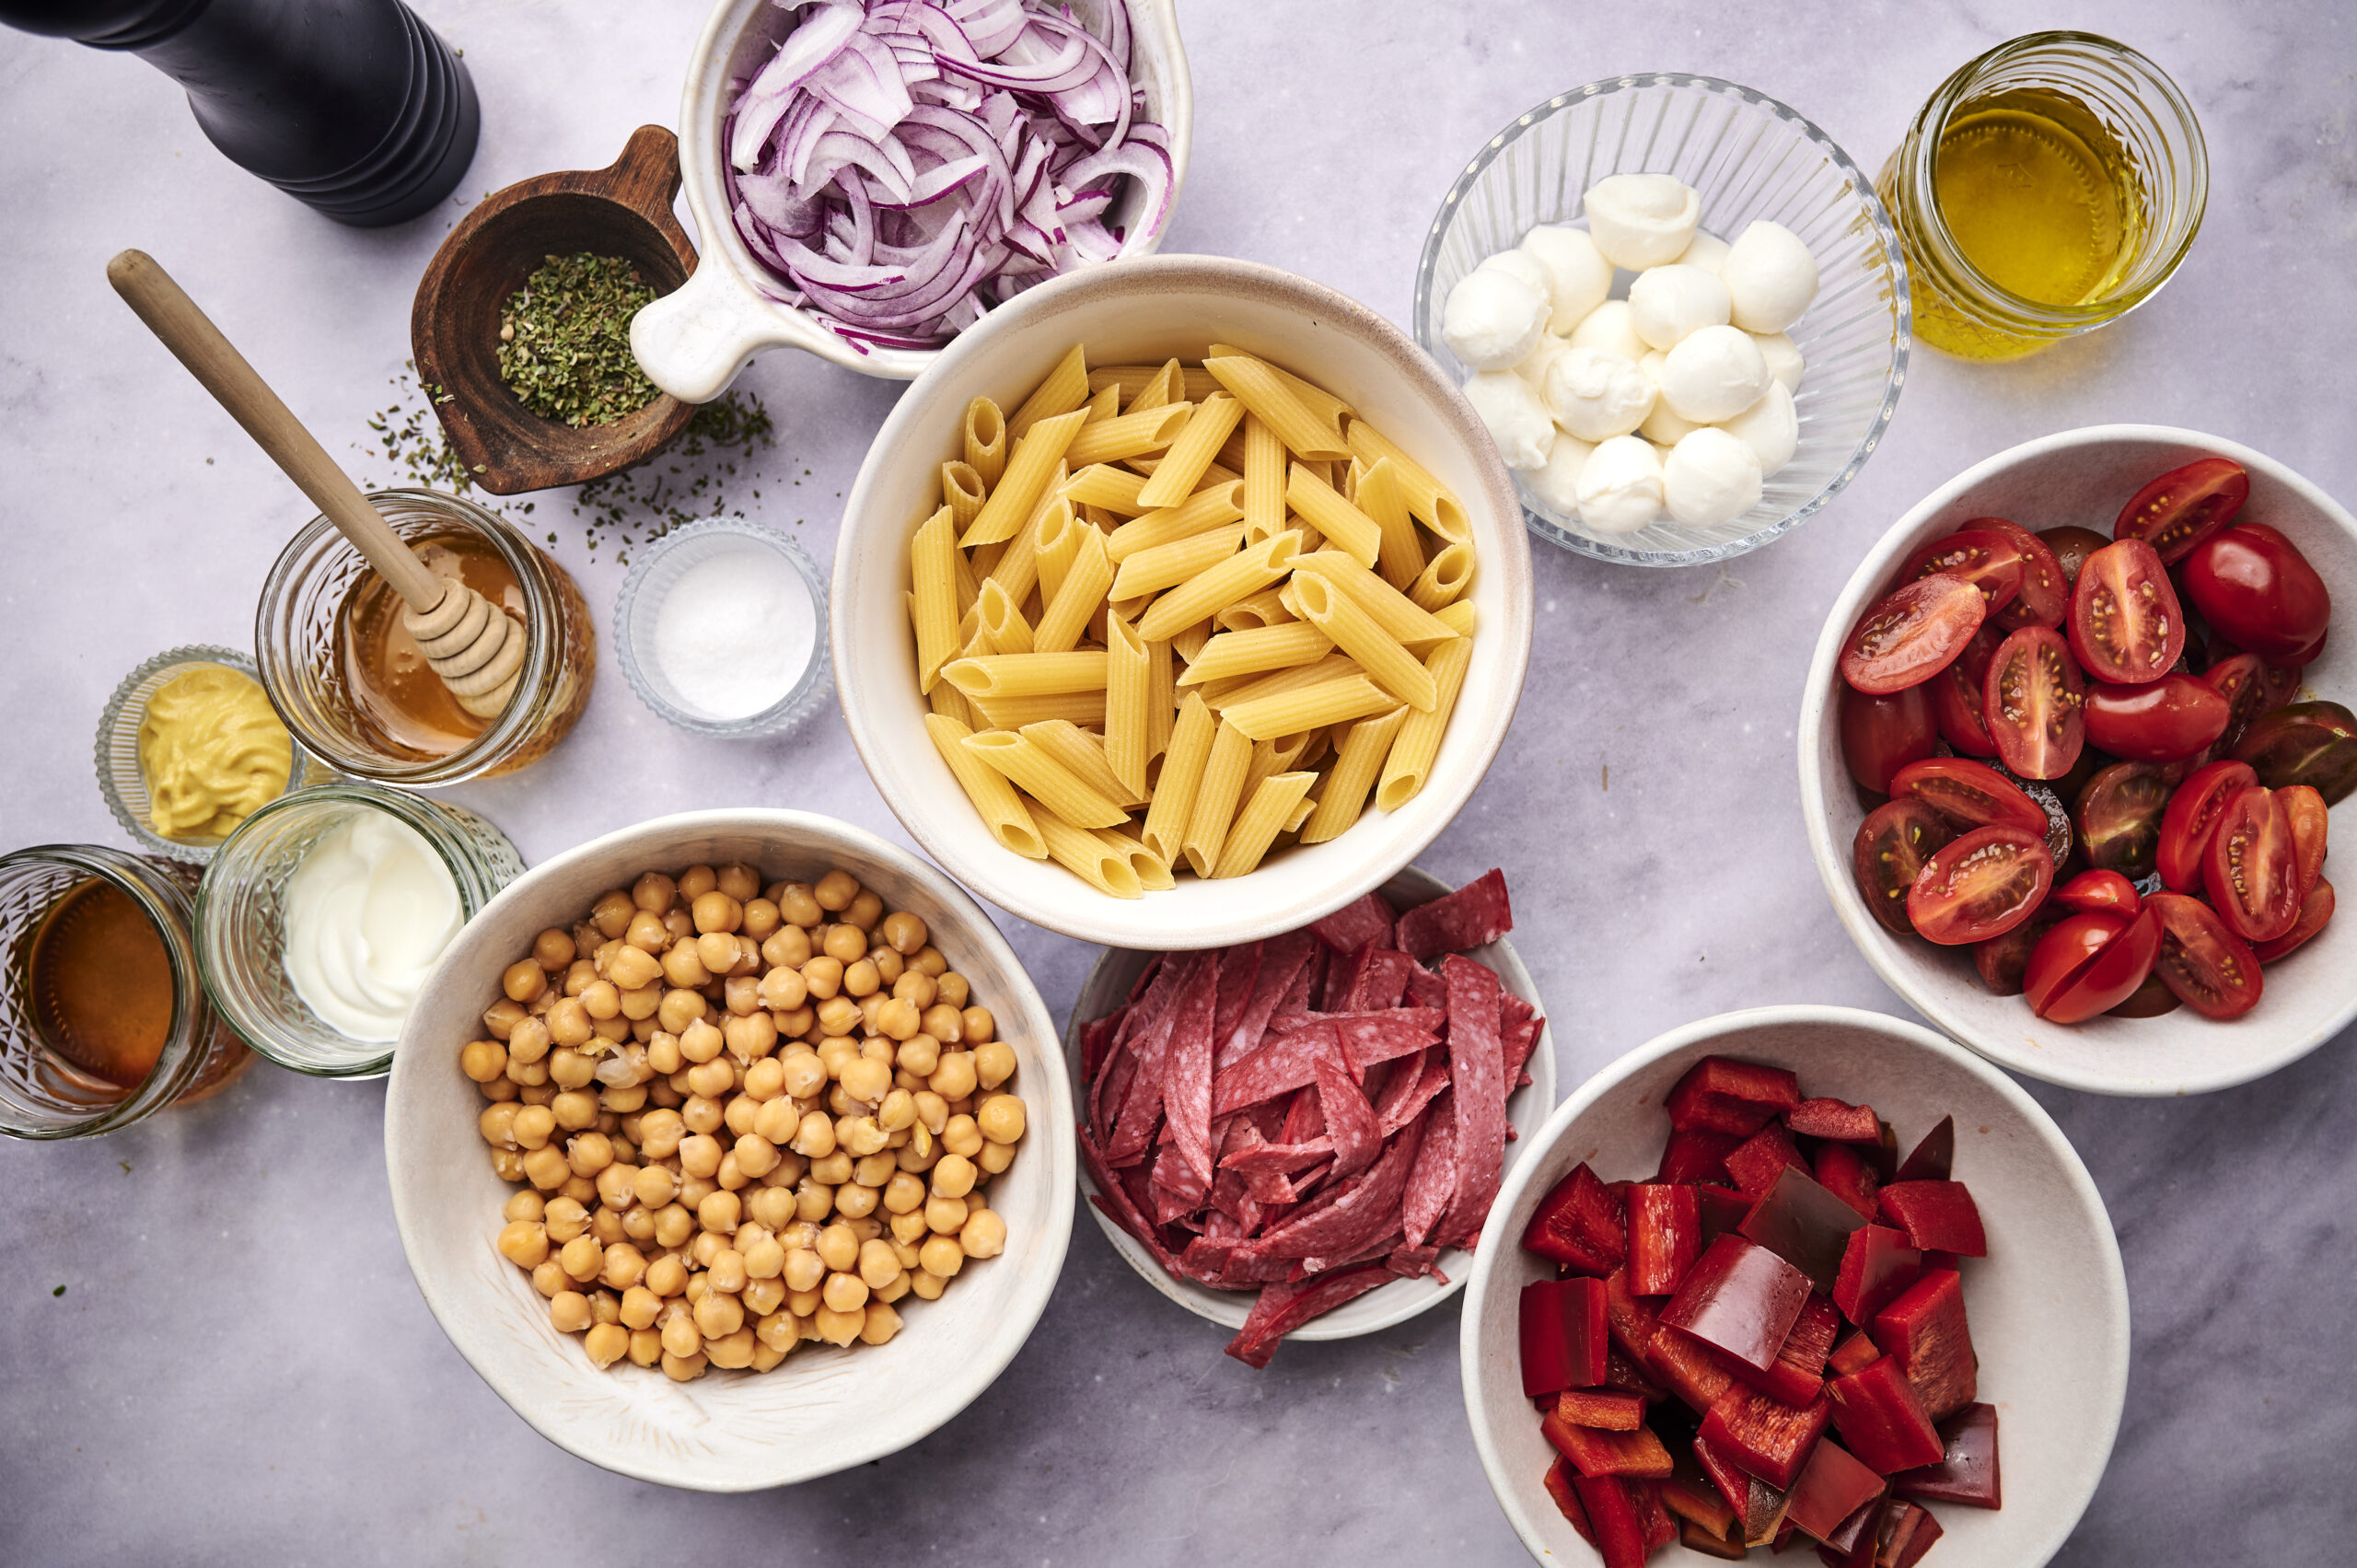 Ingredients for Italian chopped pasta salad